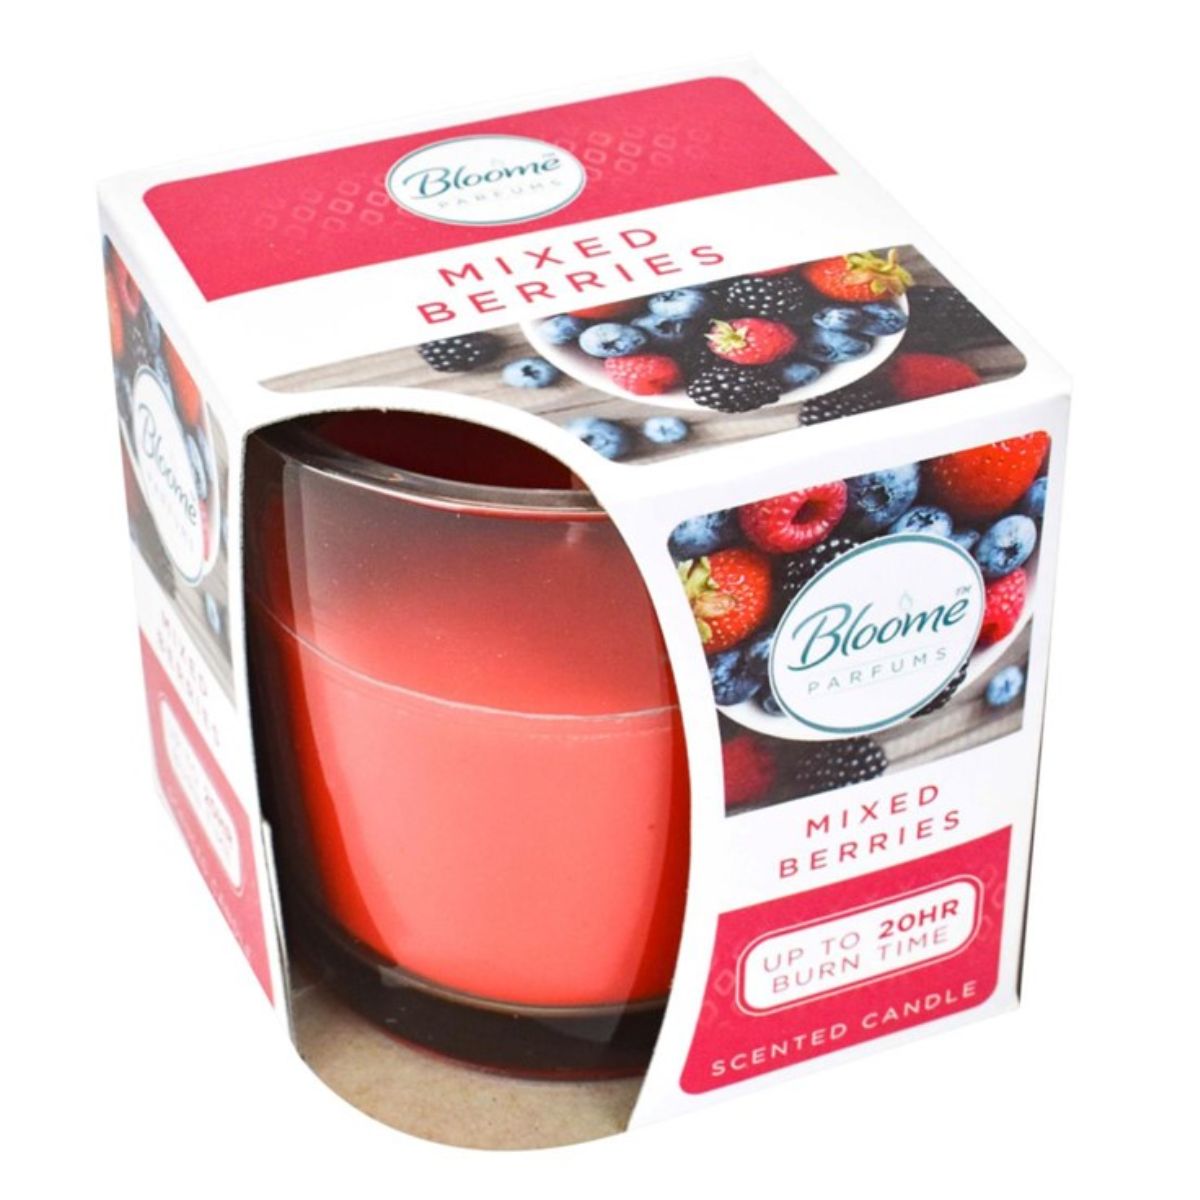 A Bloome - Mix Berries candle in a box with berries in it.